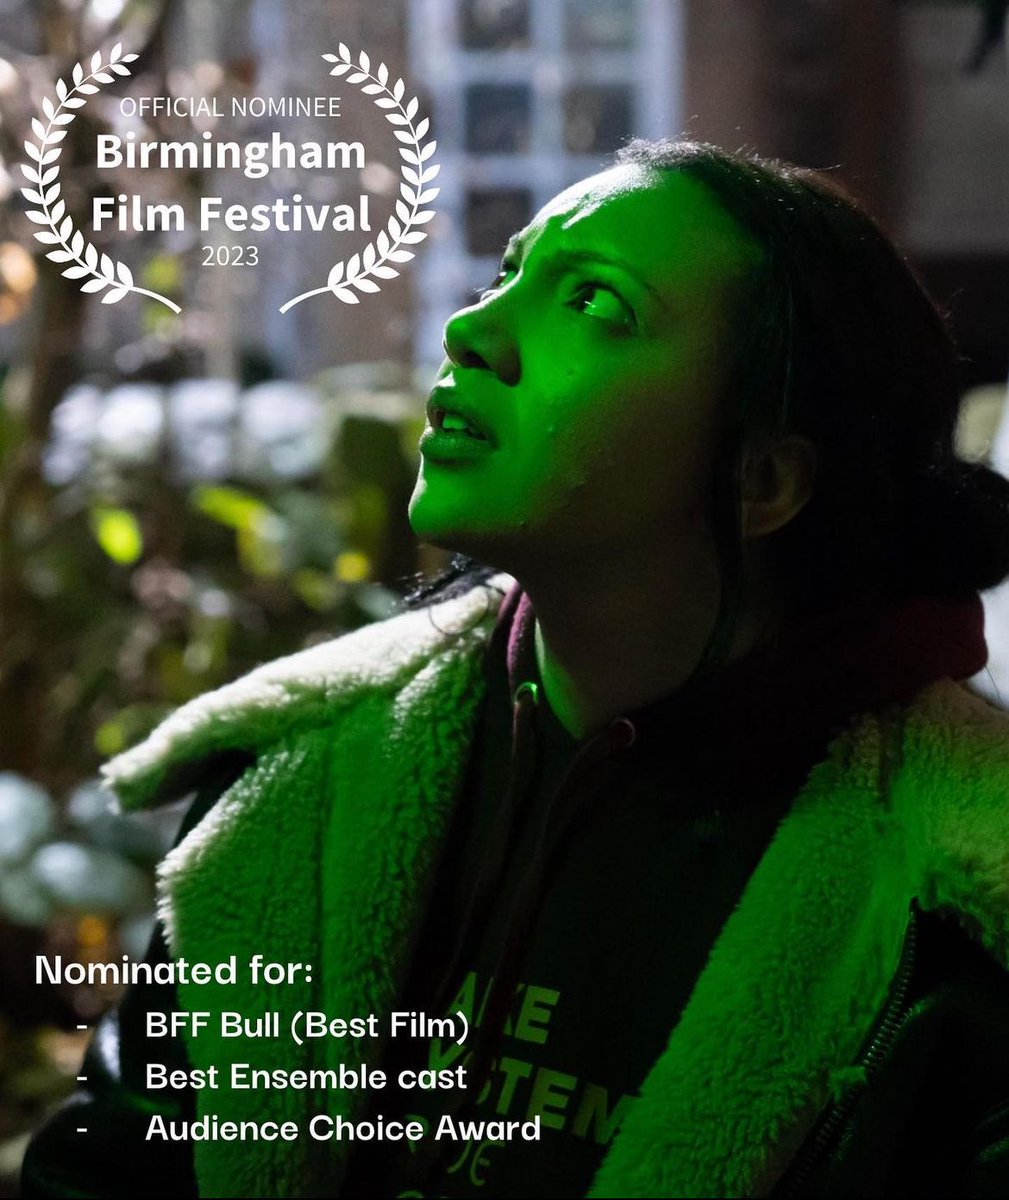 Thanks @BHAMFILMFEST for a brilliant screening of our short ‘The Man of the House’ which is now circulating the UK 🇬🇧 & the US 🇺🇸Proud of our team 🎬 #shortfilm #filmmaker #actor #producer #bff